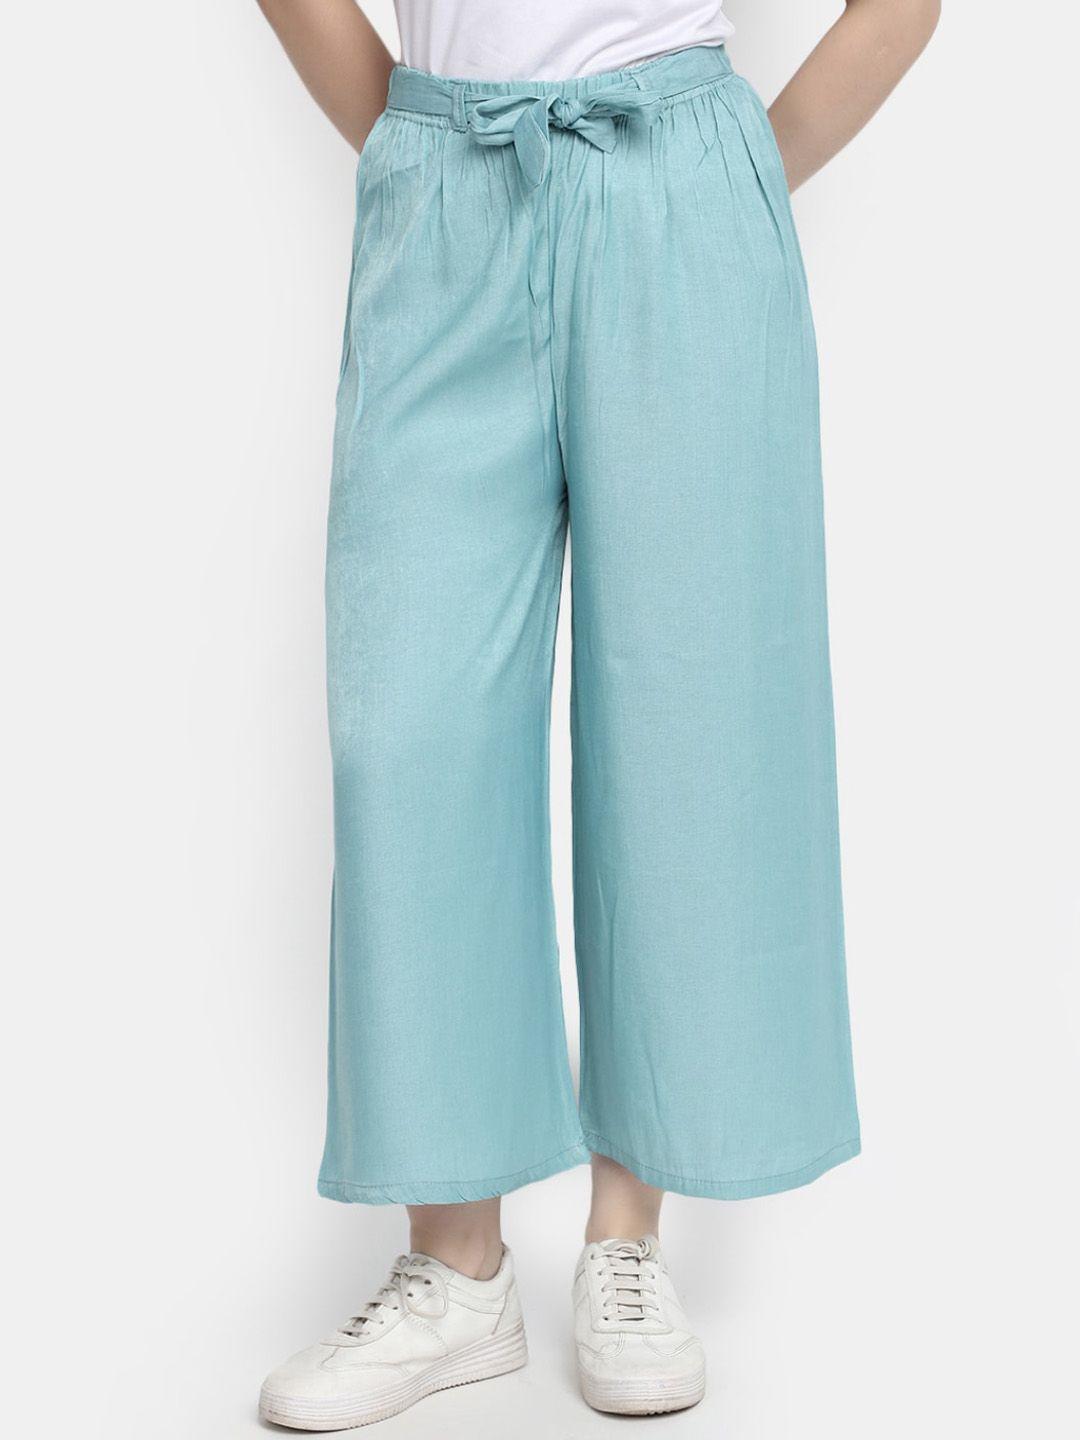 v-mart women mid-rise pleated cotton parallel trousers